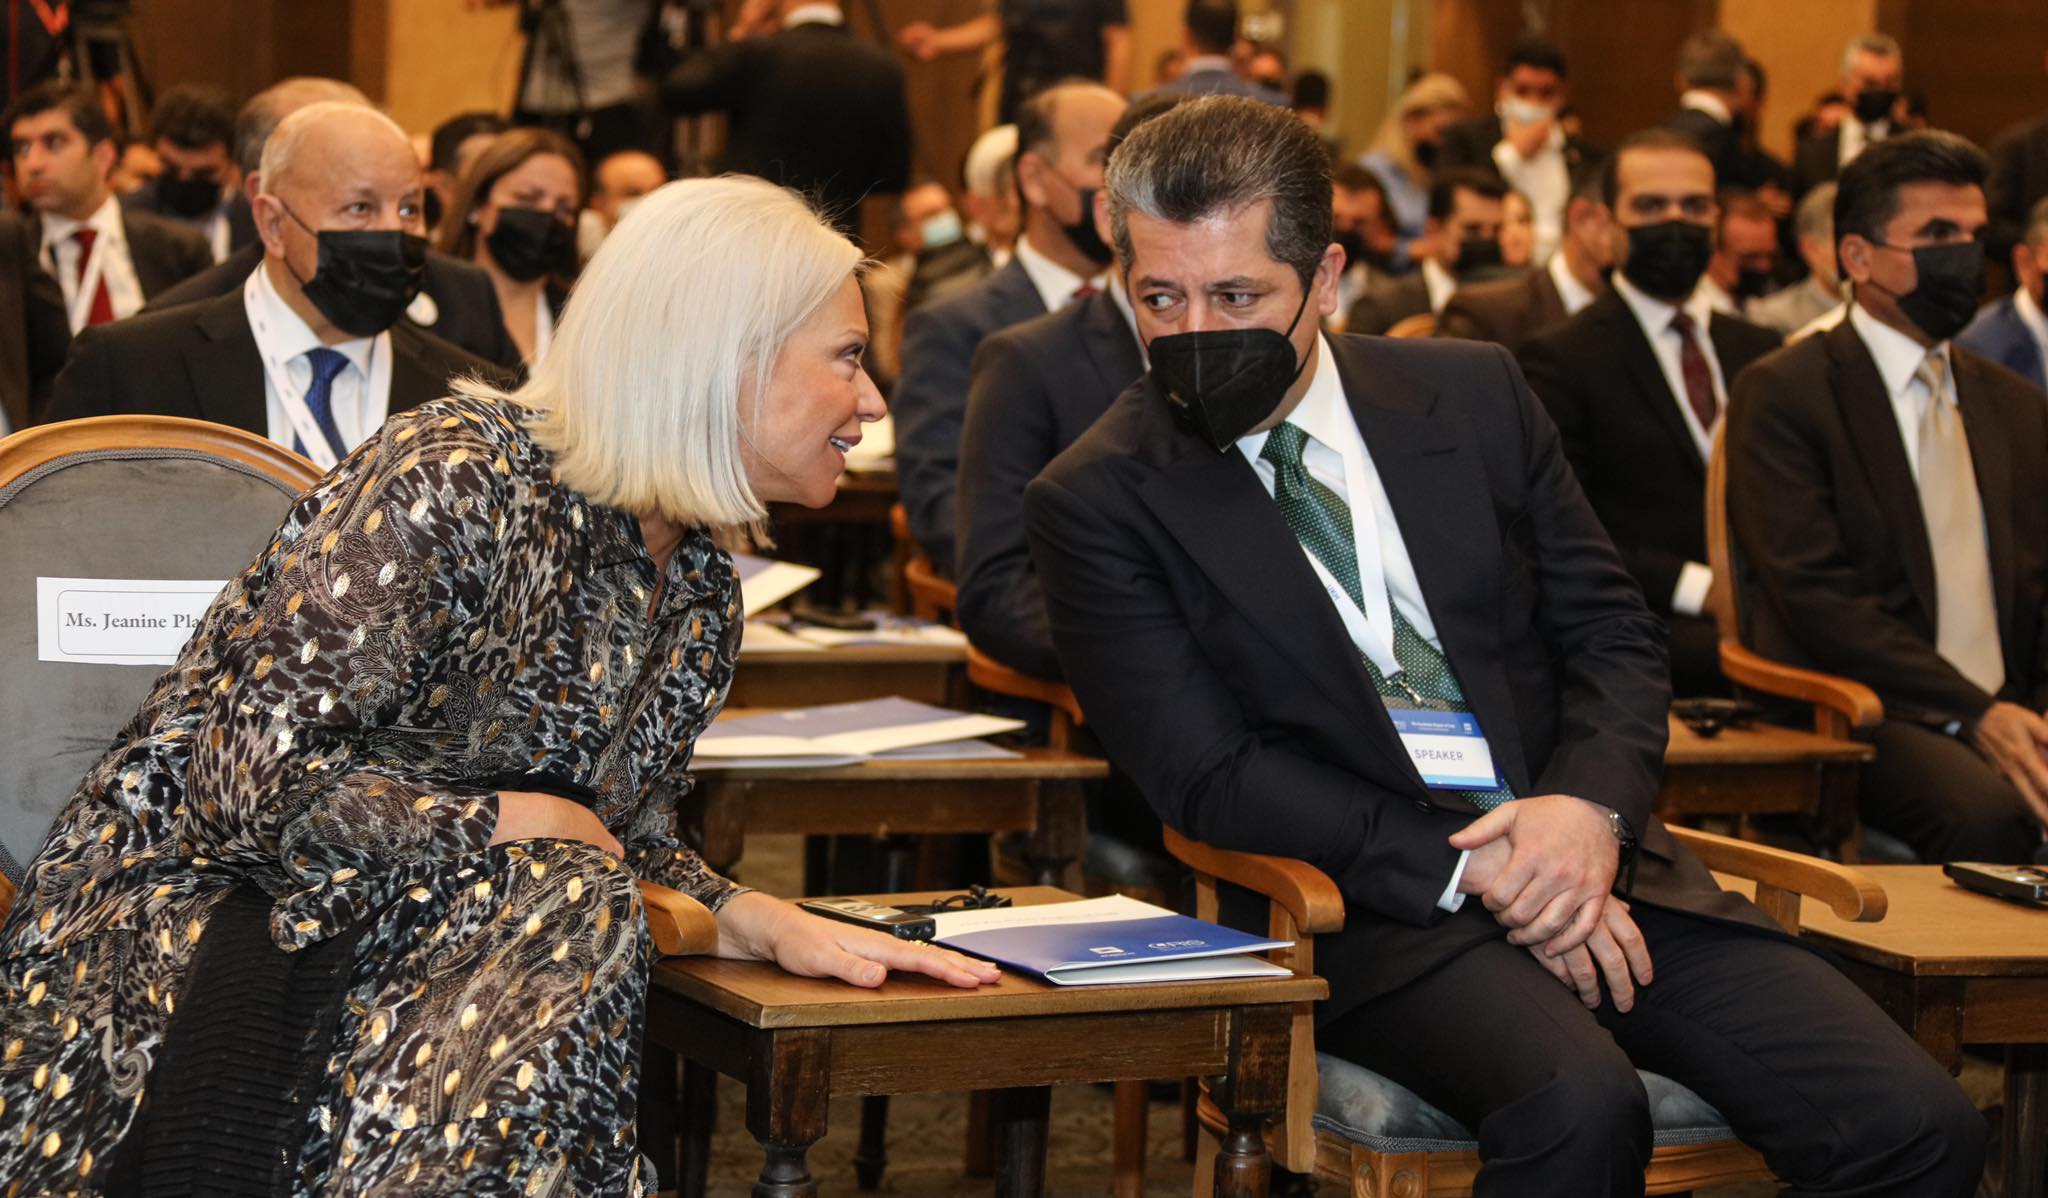 Kurdistan Region Prime Minister Masrour Barzani (right) and UN special envoy for Iraq Jeanine Hennis-Plasschaert at a conference on political unity on May 19, 2021. (Photo: Kurdistan 24)